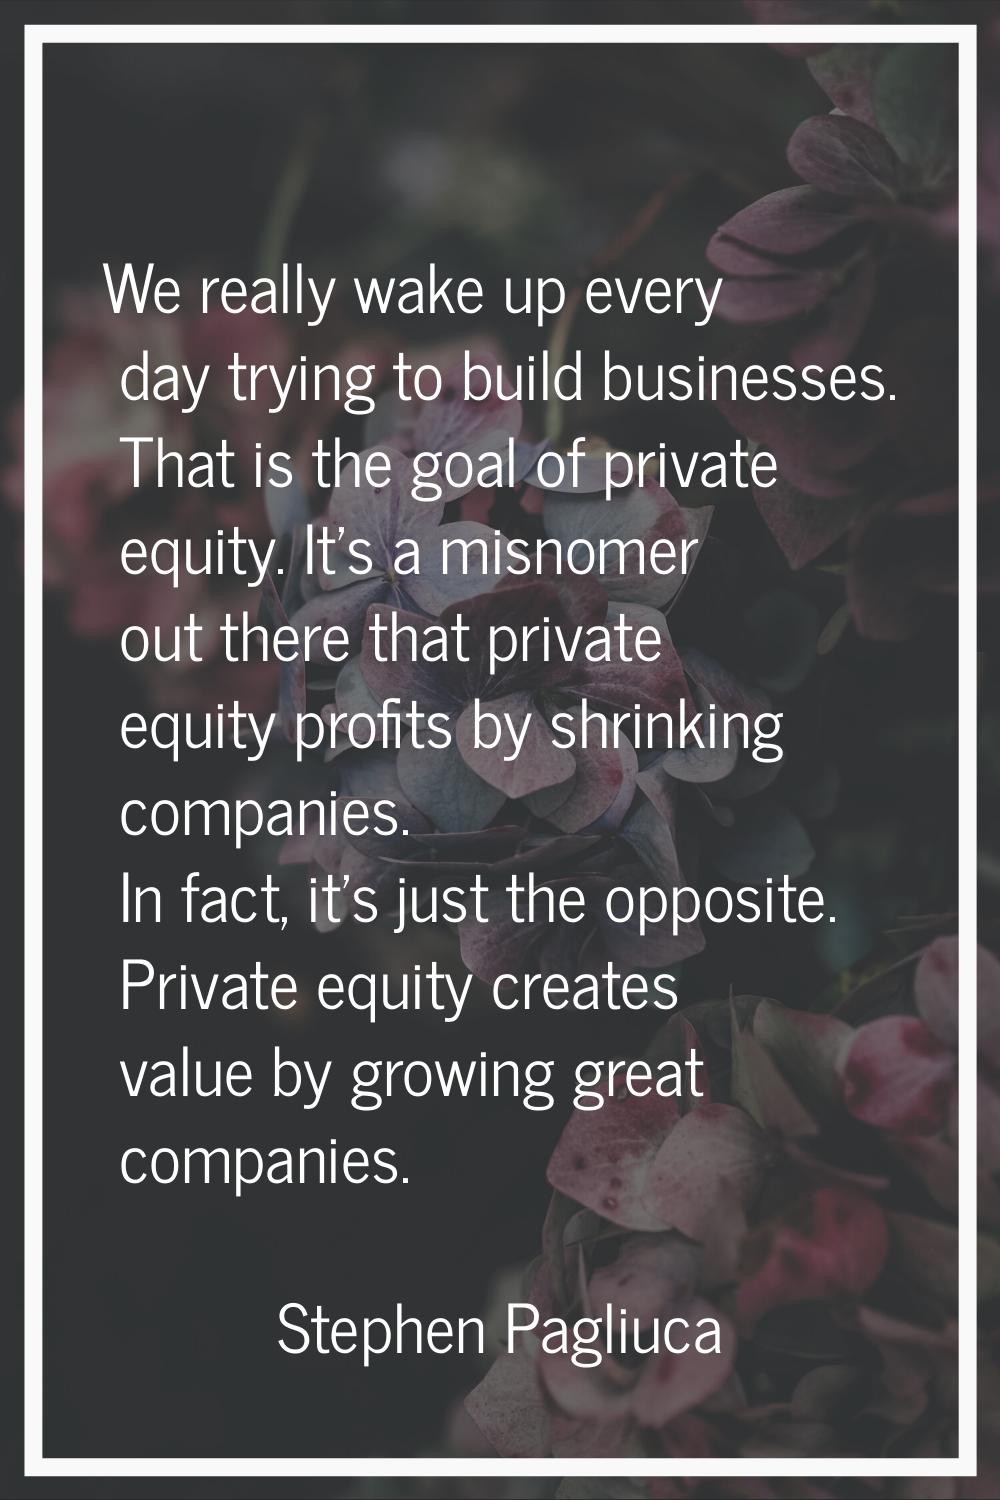 We really wake up every day trying to build businesses. That is the goal of private equity. It's a 